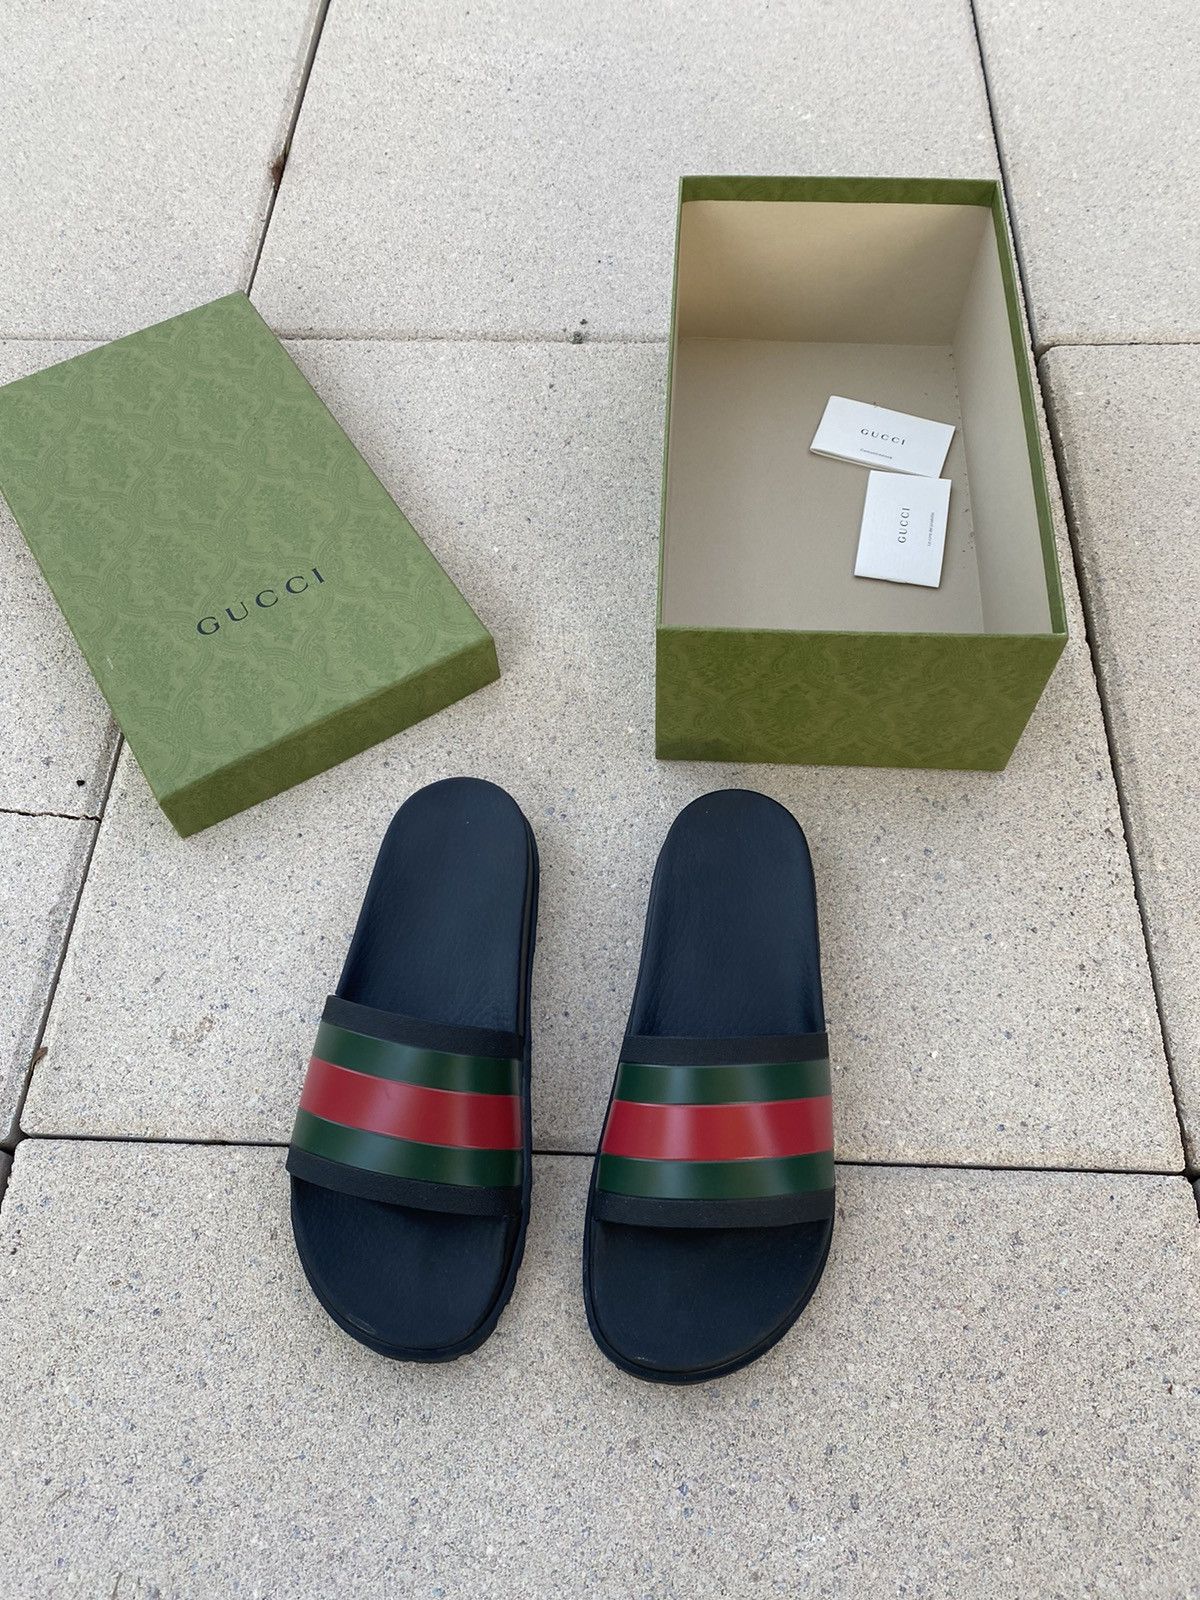 Gucci Tractor grip gucci slides classic colorway | Grailed